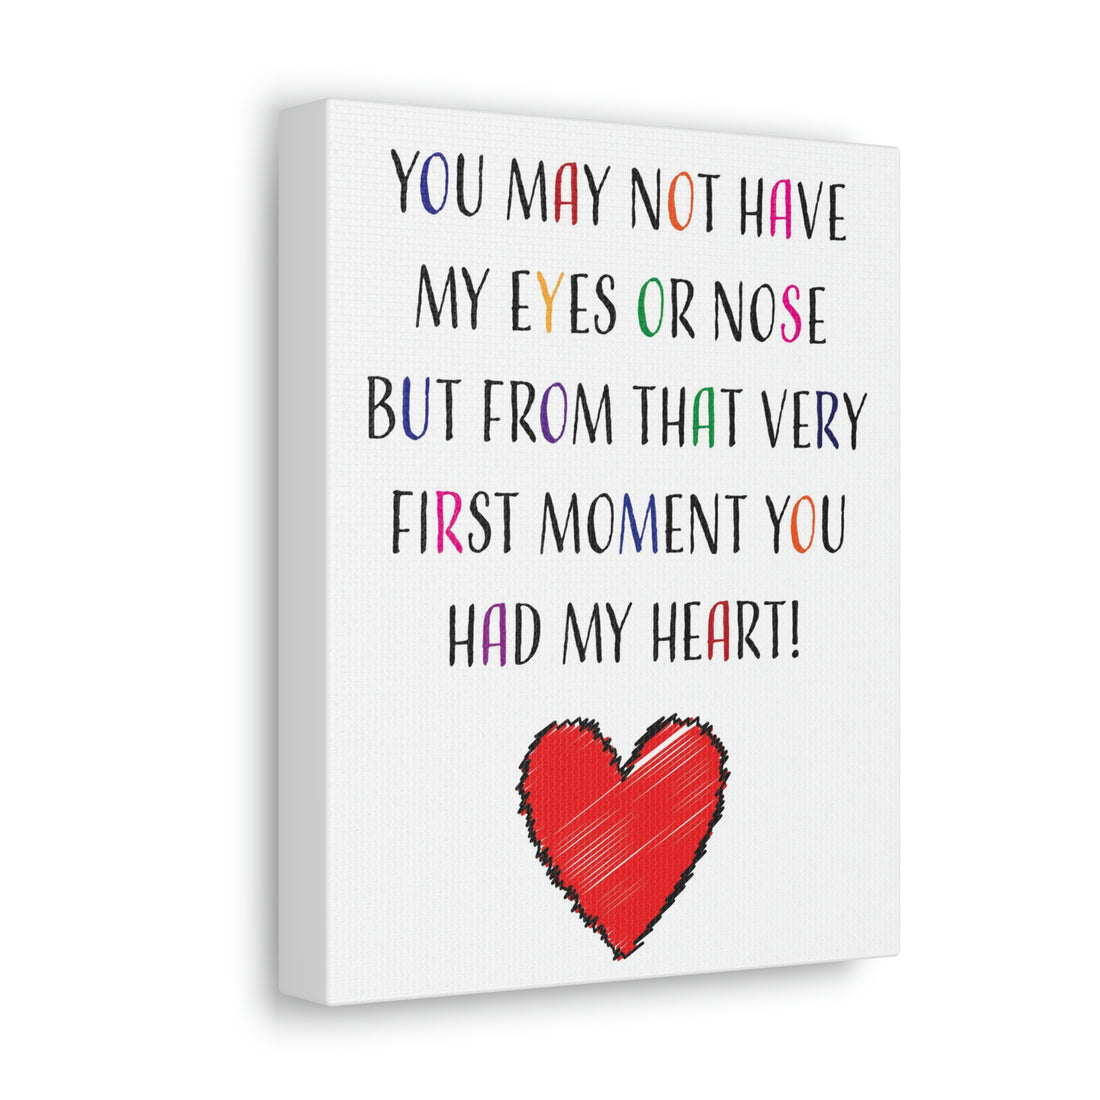 You may not have my eyes or nose but from that very first moment you had my HEART - Canvas Print